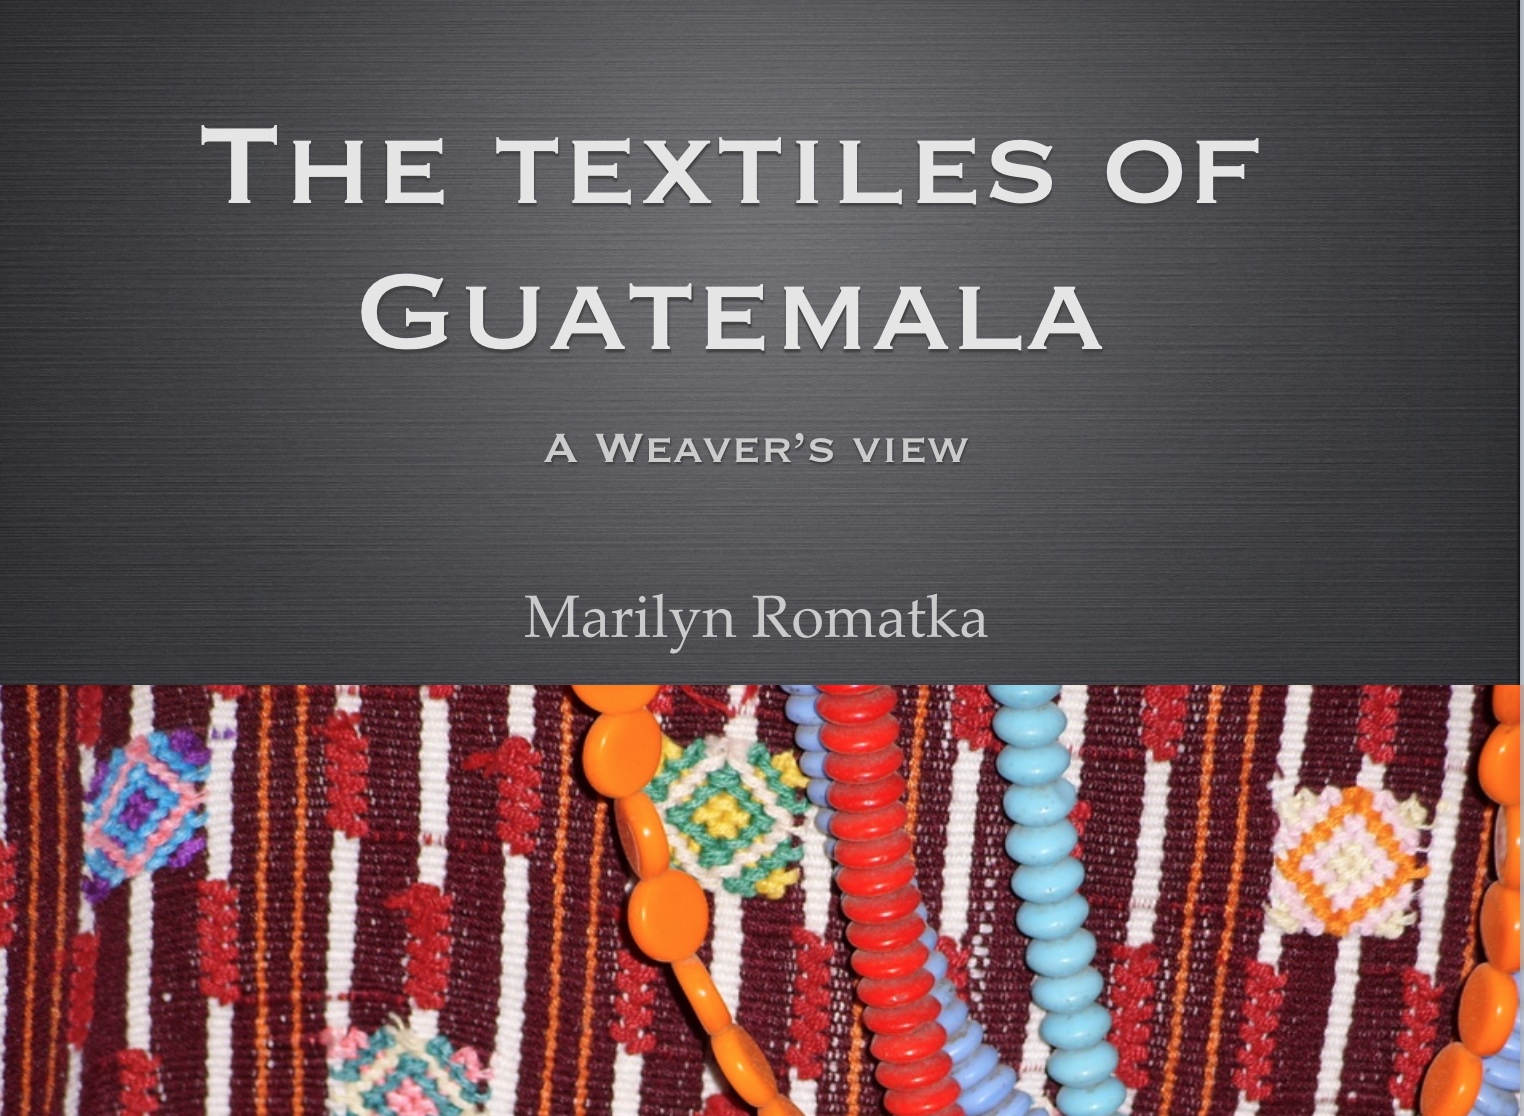 The Textiles of Guatemala: A Weaver’s View